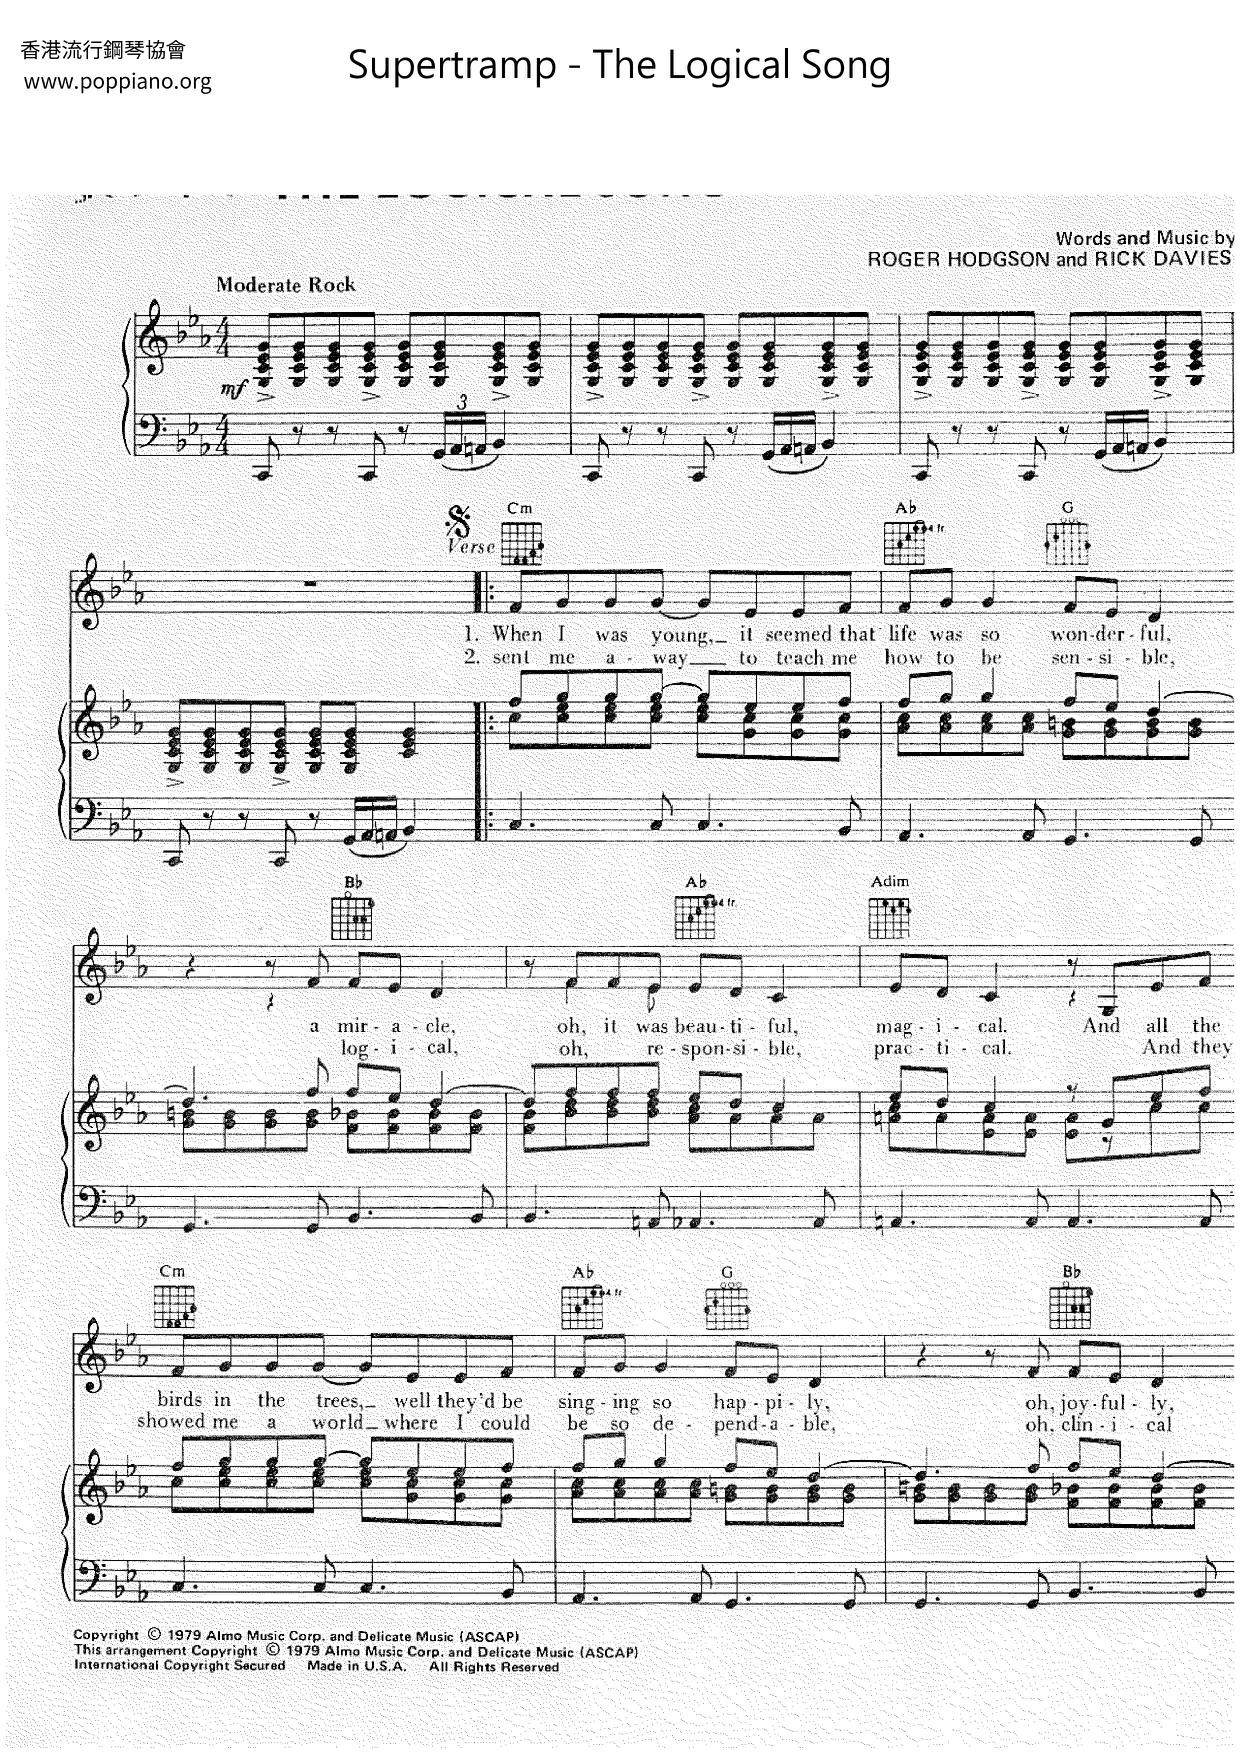 The Logical Song Score